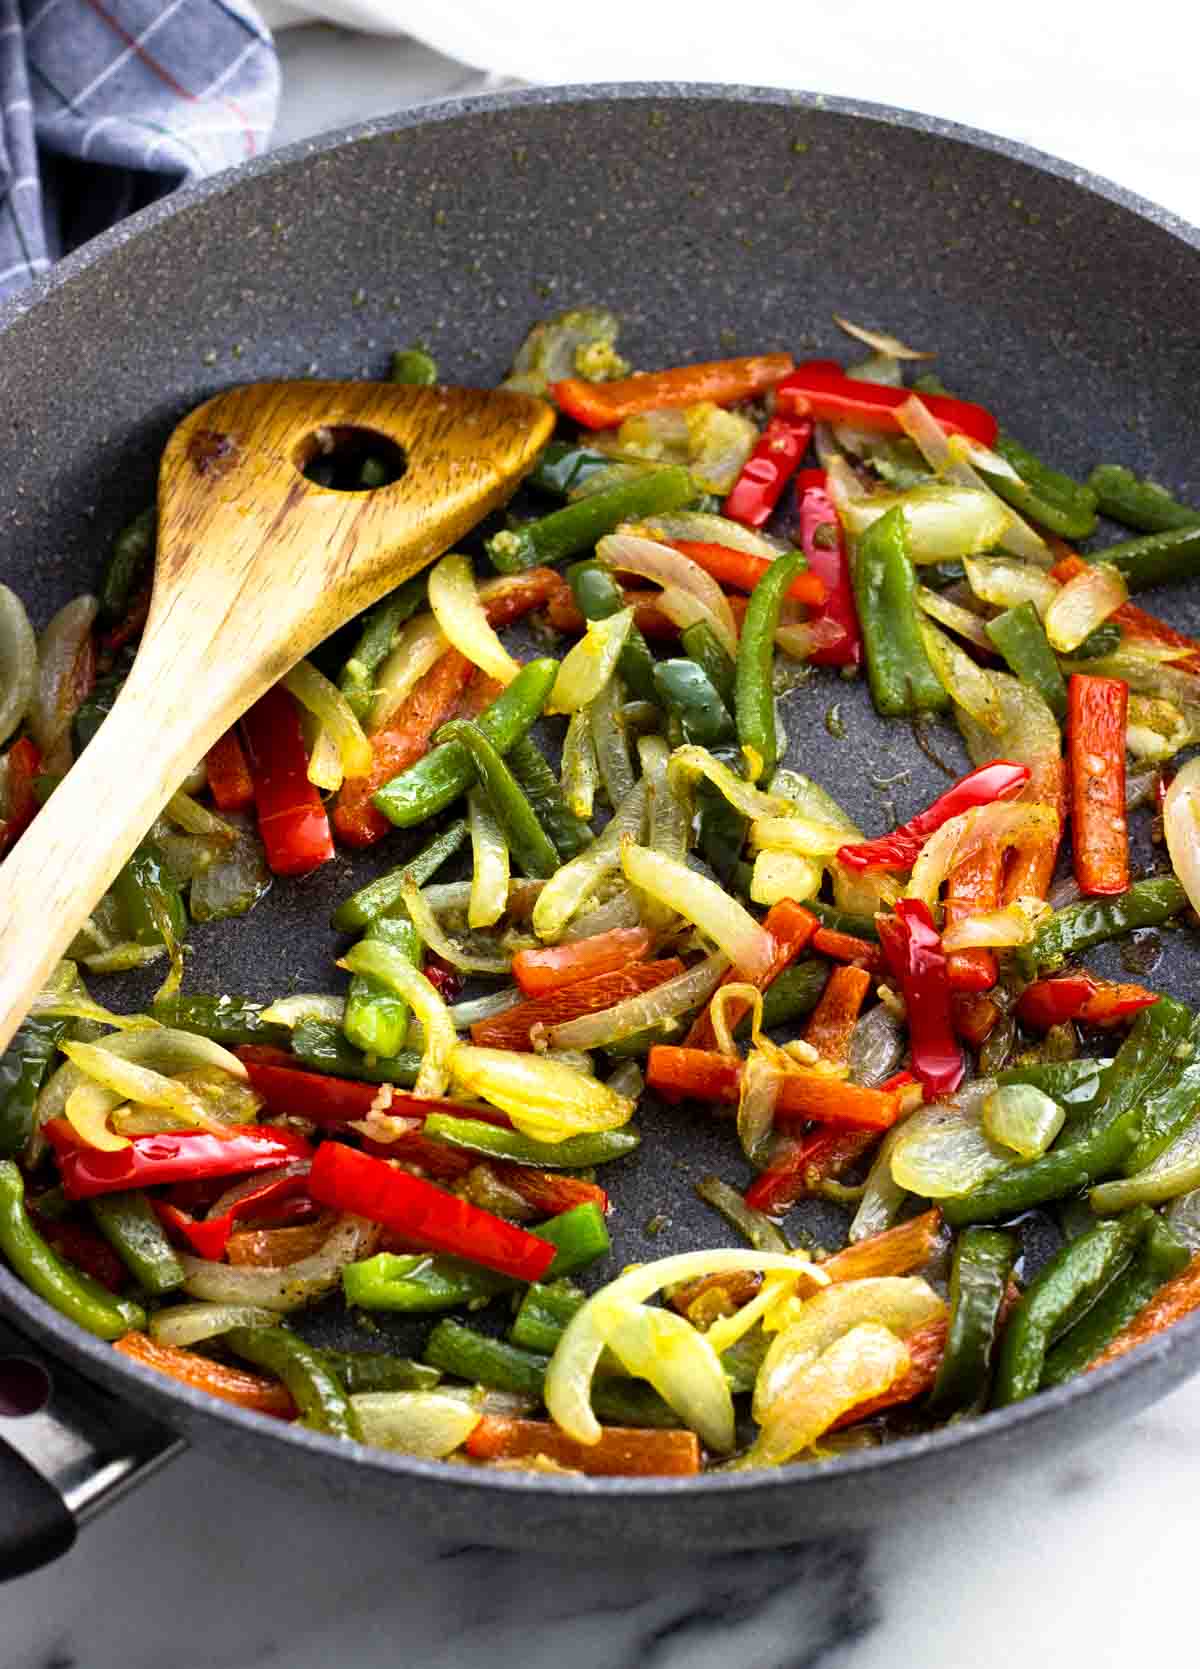 Sauteed peppers, onions, and garlic in a skillet.